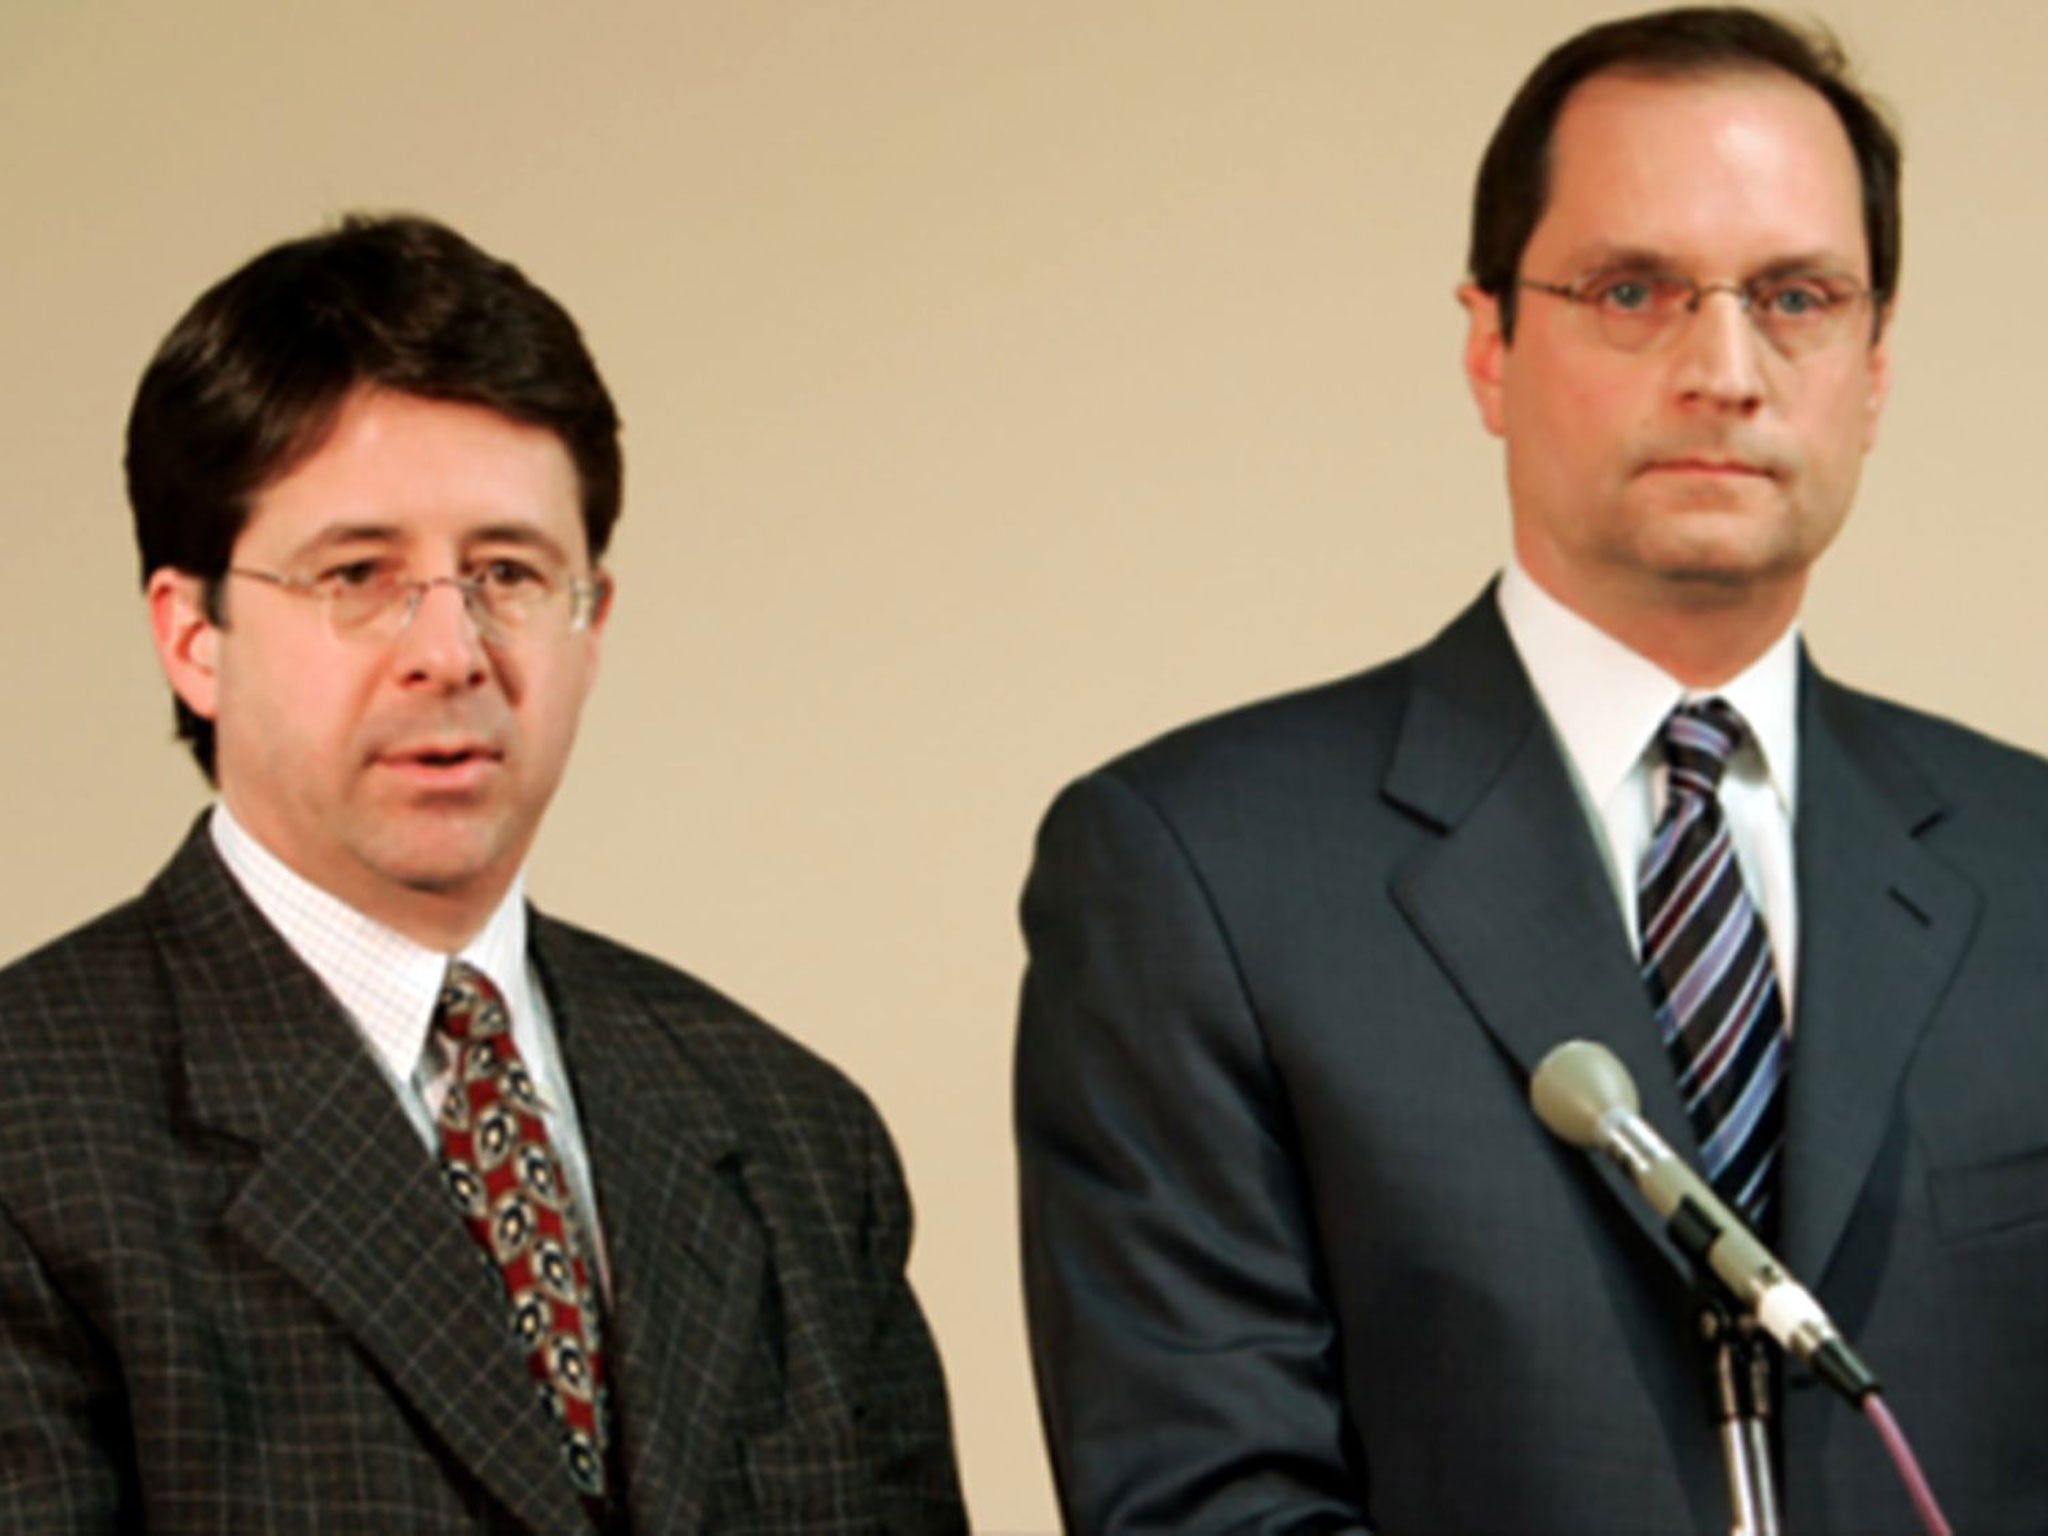 Defence lawyers Dean Strang, left, and Jerry Buting